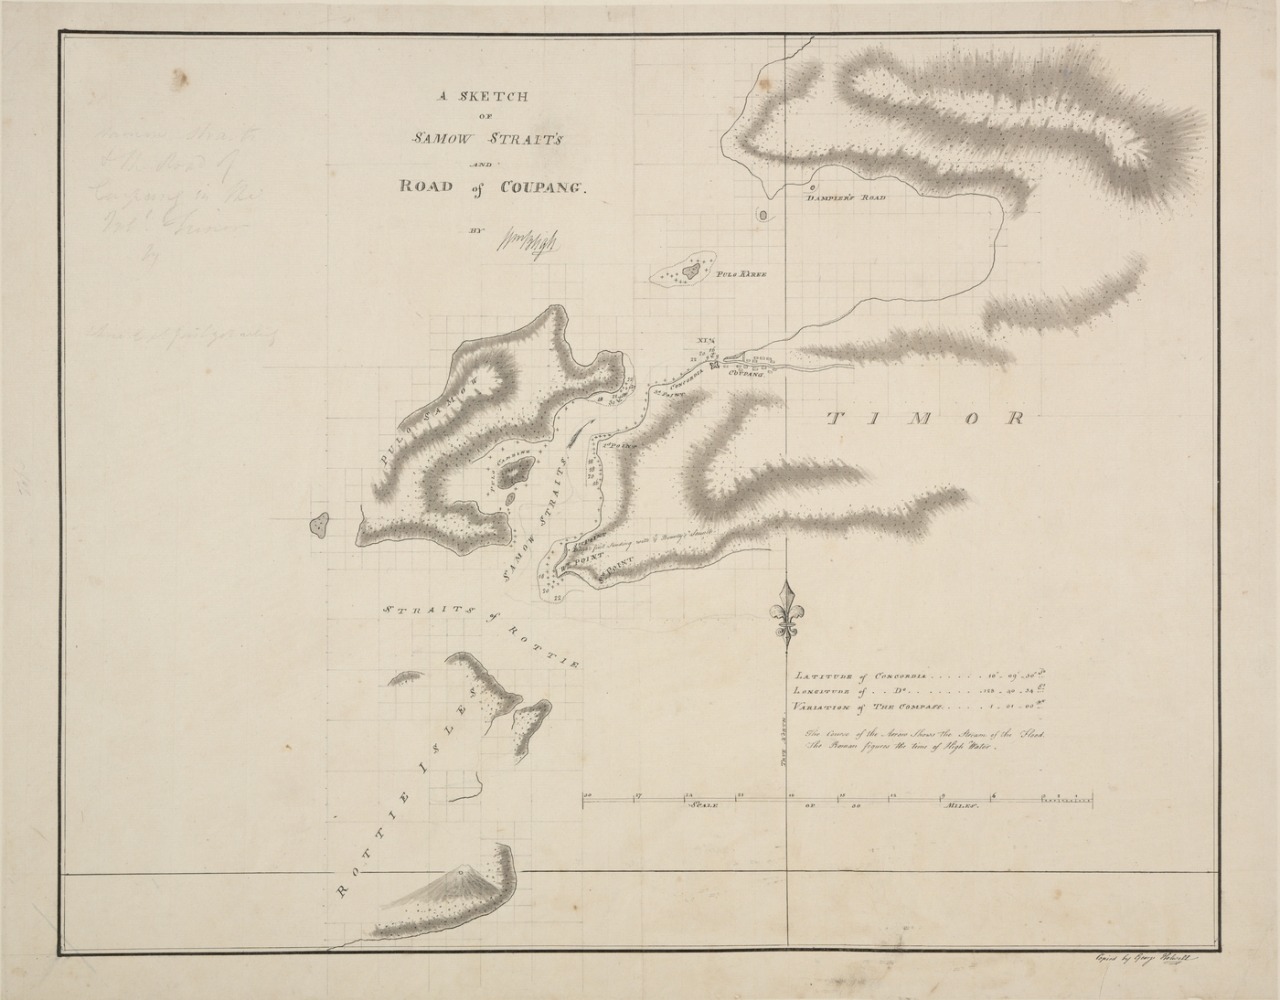 Sketch of Coupang harbor by William Bligh